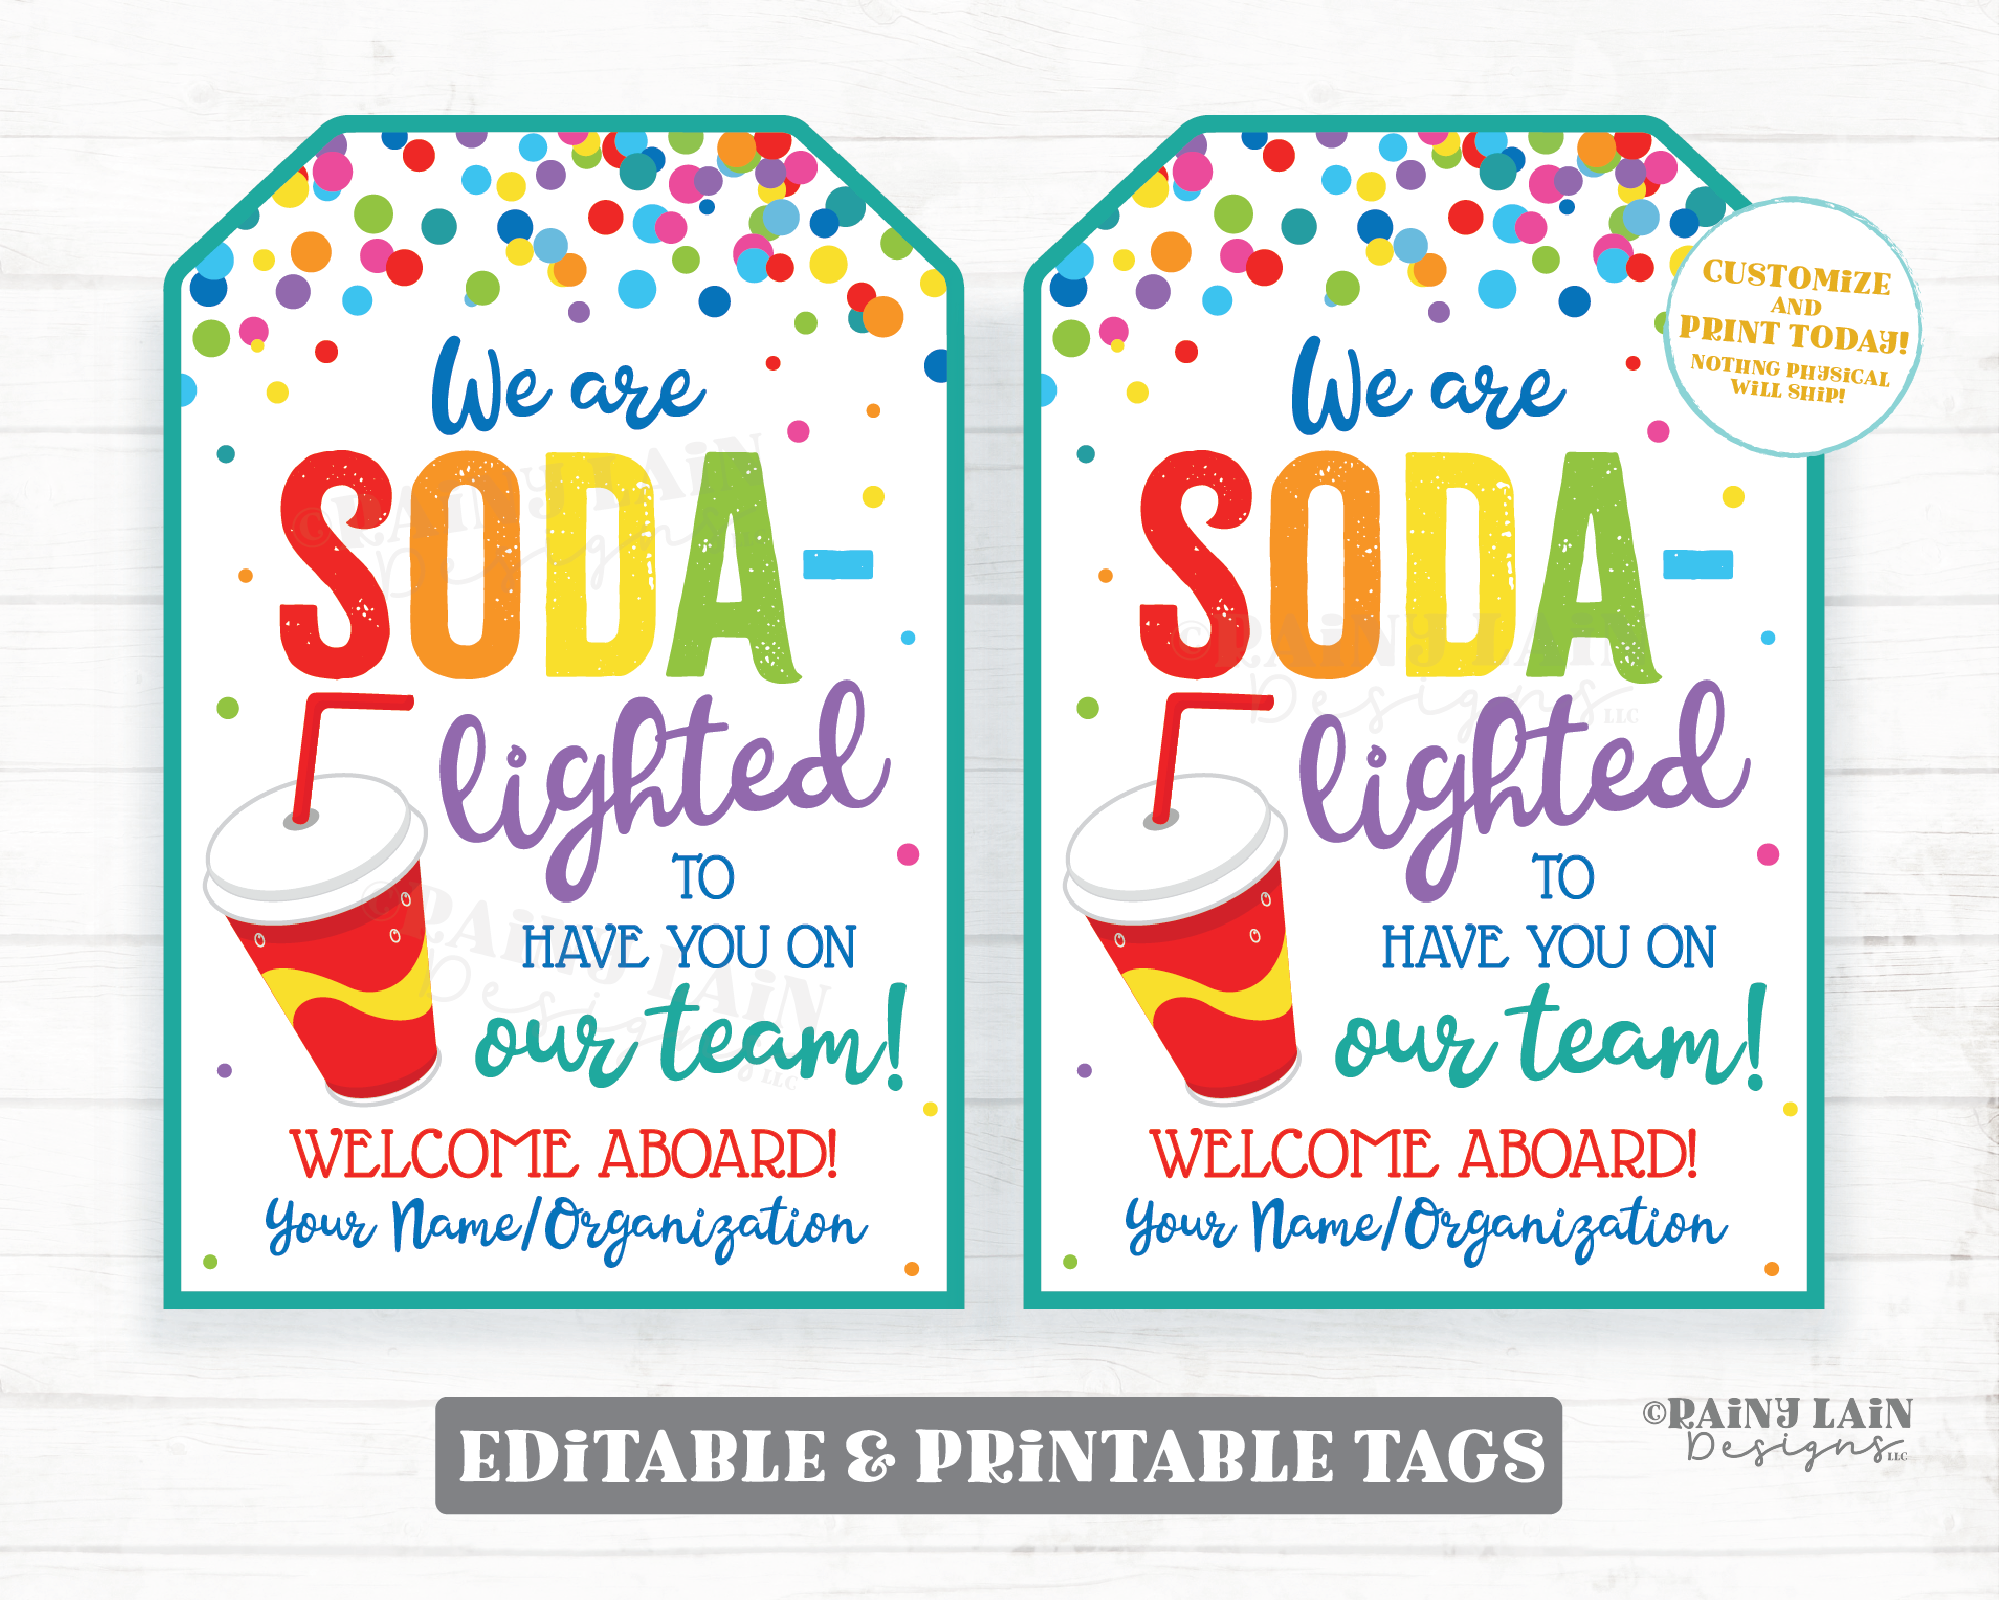 SODAlighted to Have You on Our Team Tag Soda Gift Soda Pop Employee Welcome Appreciation Co-Worker Staff Teacher PTO School